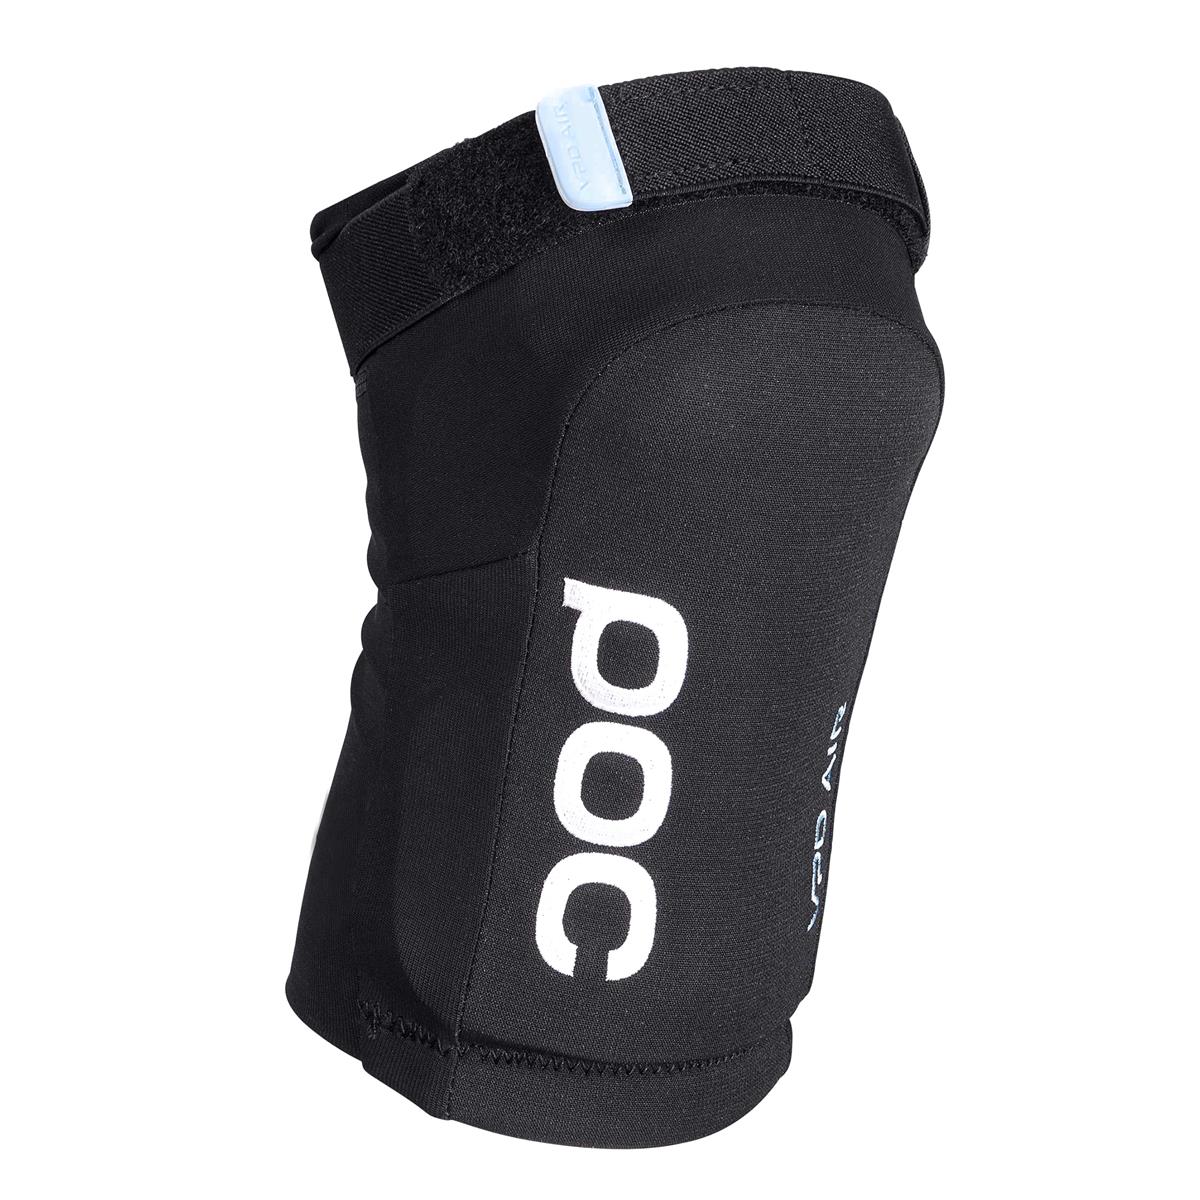 Joint VPD Air Knee pads black Size XS